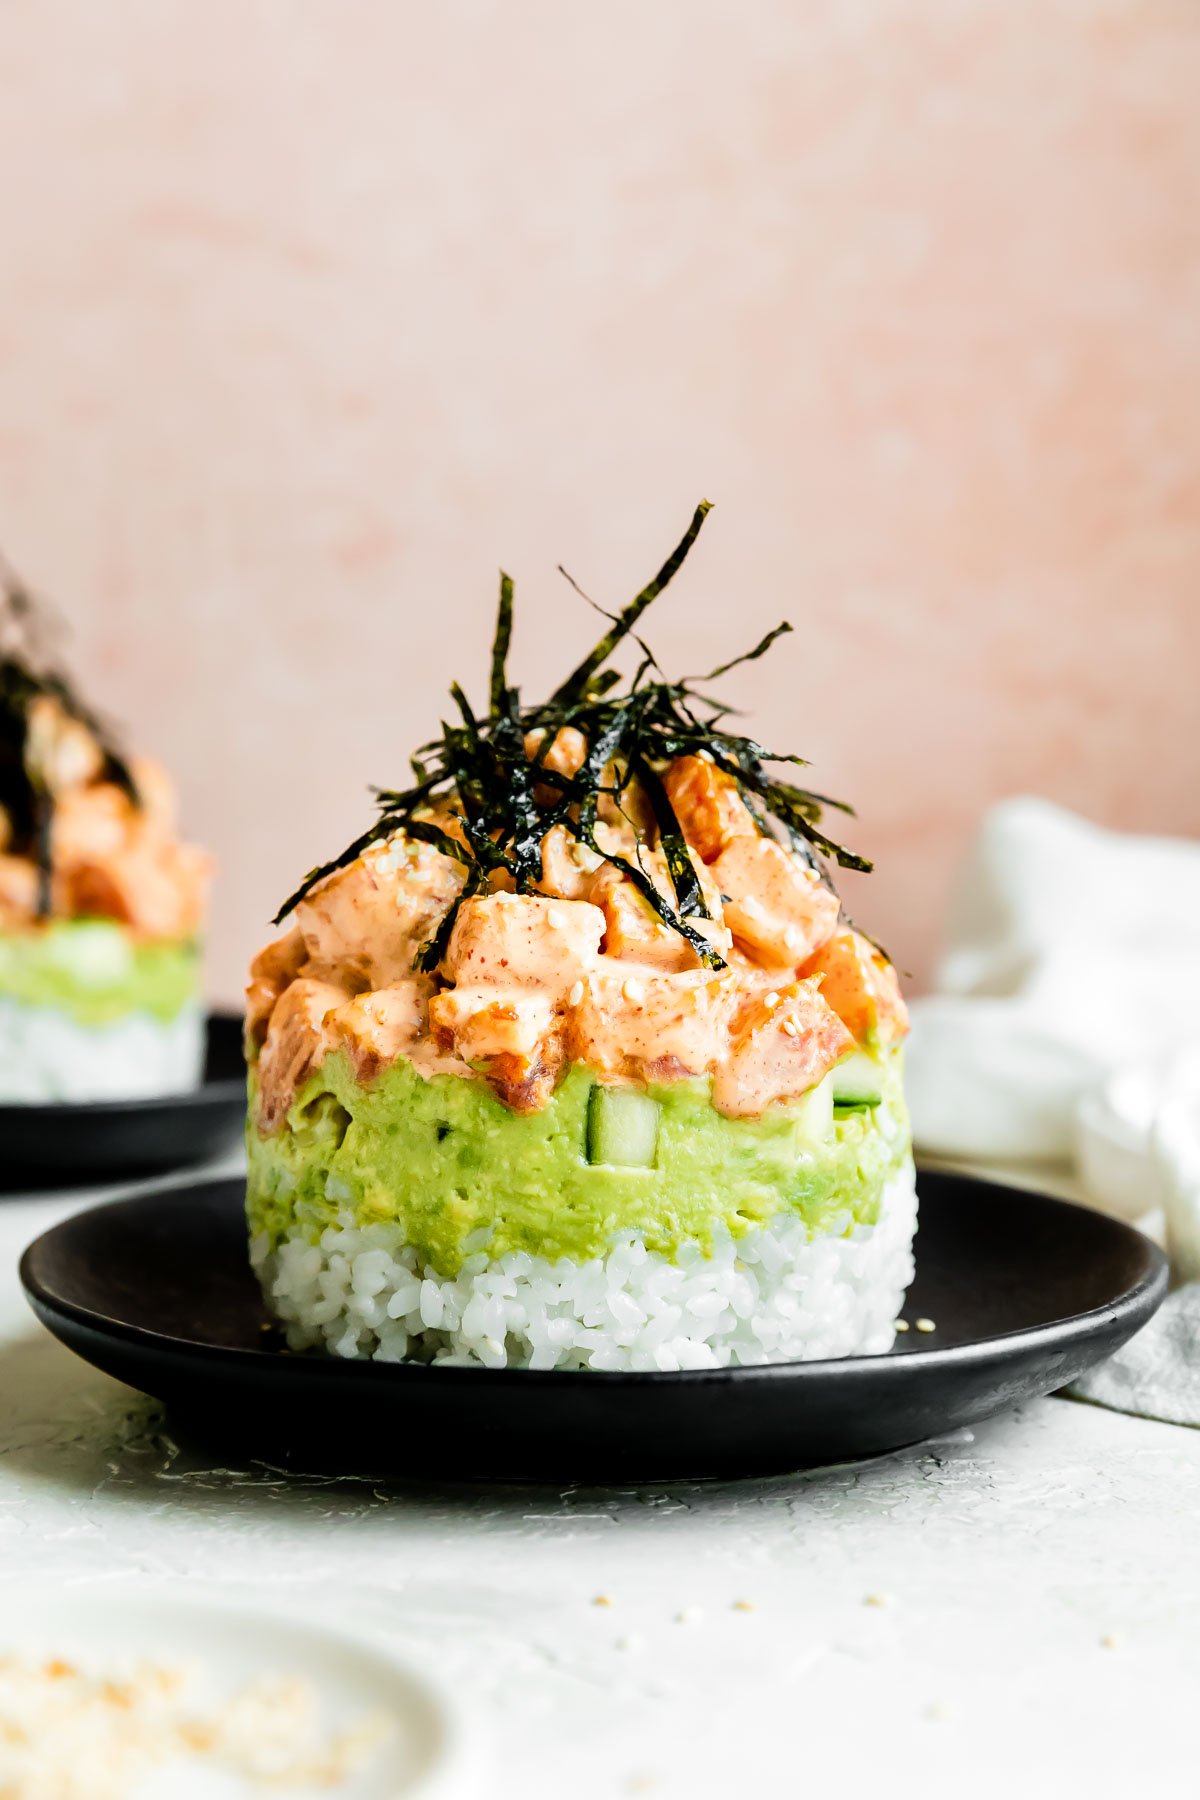 https://playswellwithbutter.com/wp-content/uploads/2022/12/Spicy-Tuna-Sushi-Stacks-7.jpg